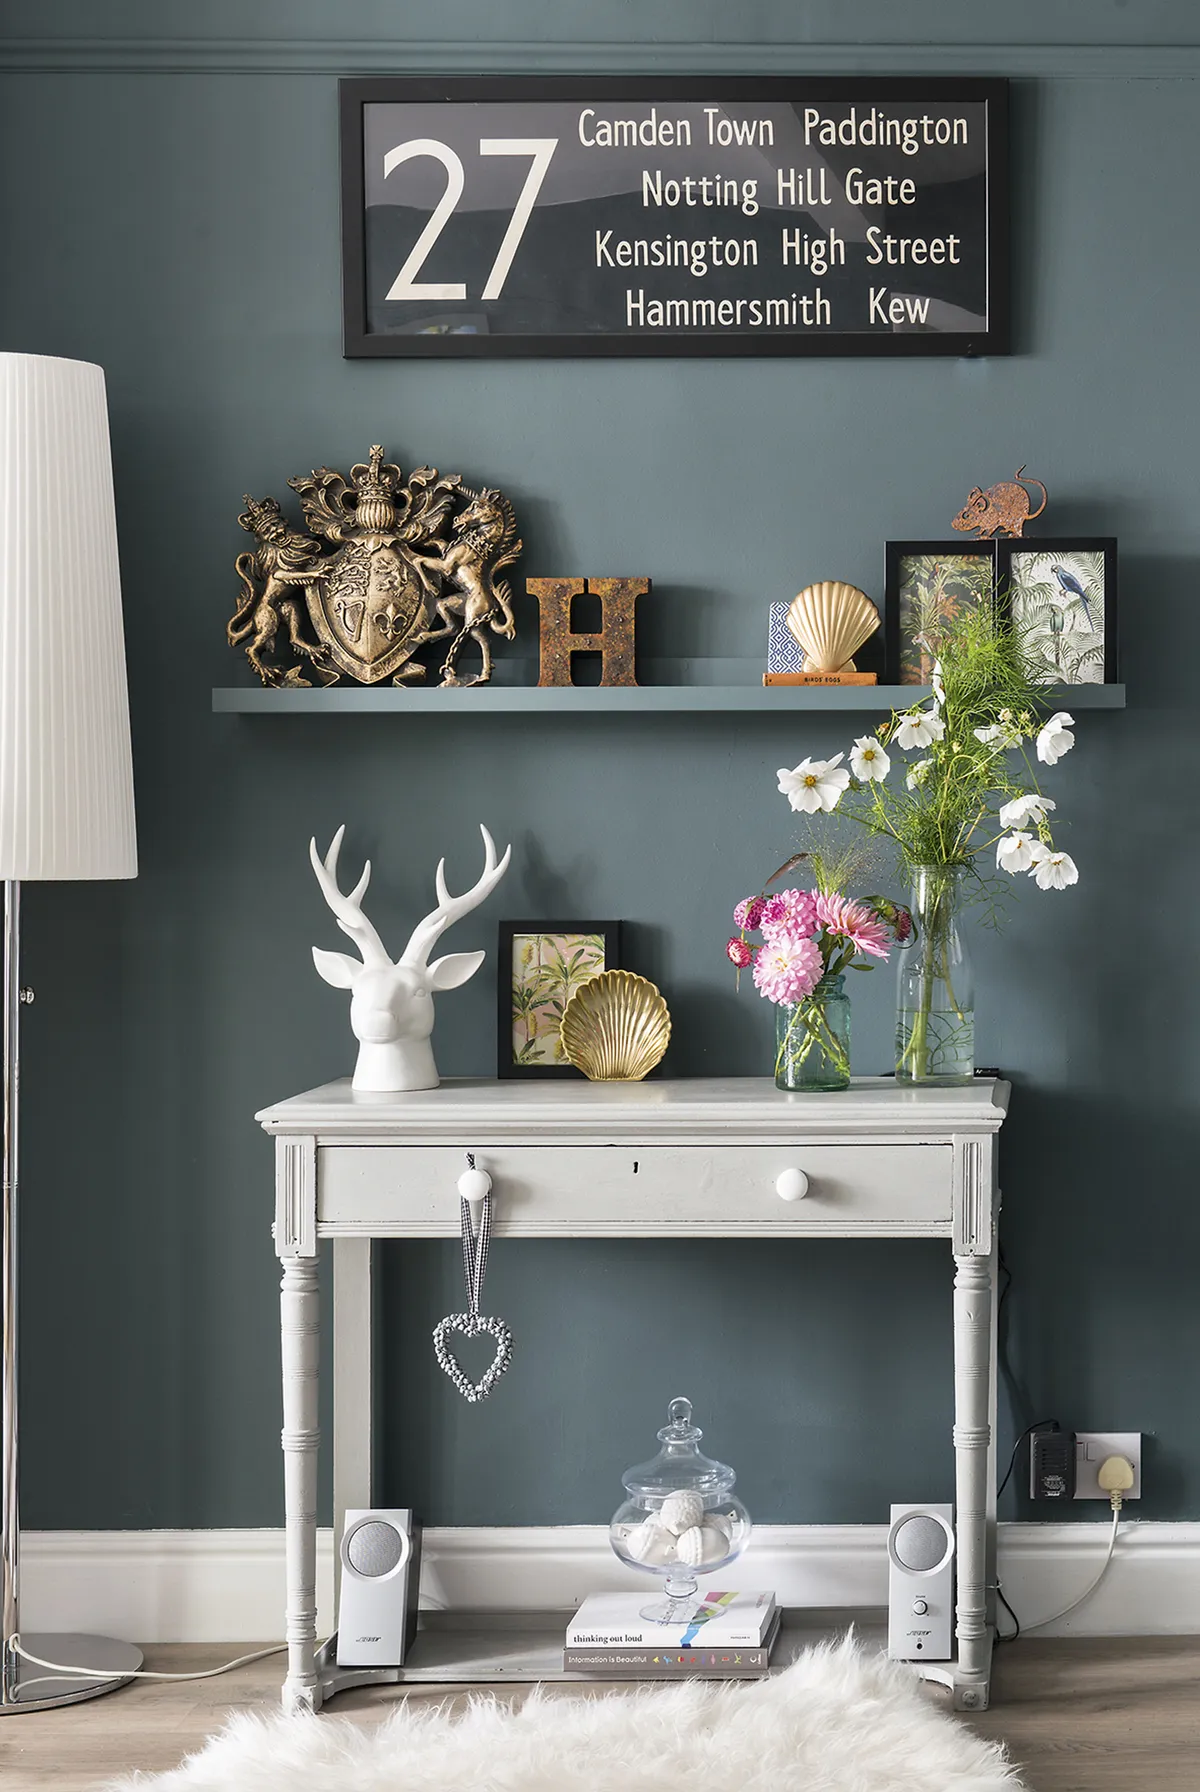 Sarah spotted a console table at The Quiet Woman Antiques Centre in Oxfordshire and painted it in Annie Sloan’s Paris Grey. In keeping with its vintage look, she has added retro accessories, including the London bus blind, found on eBay, on the wall above